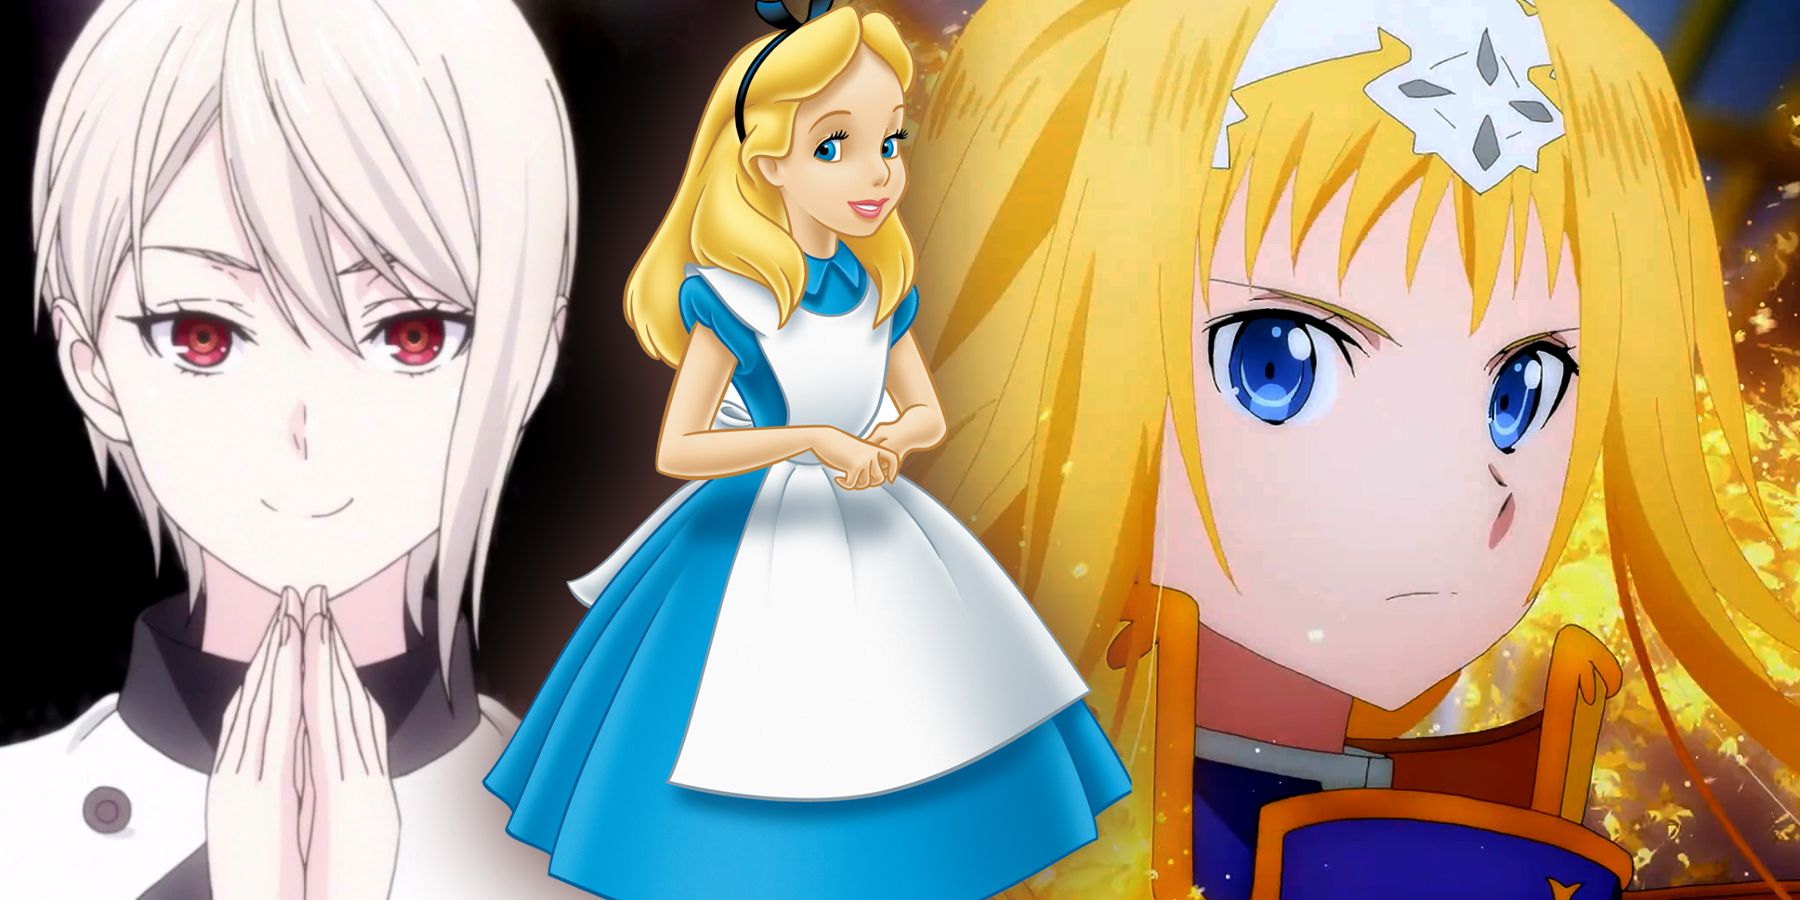 Alice in Wonderland inspired many anime character's names